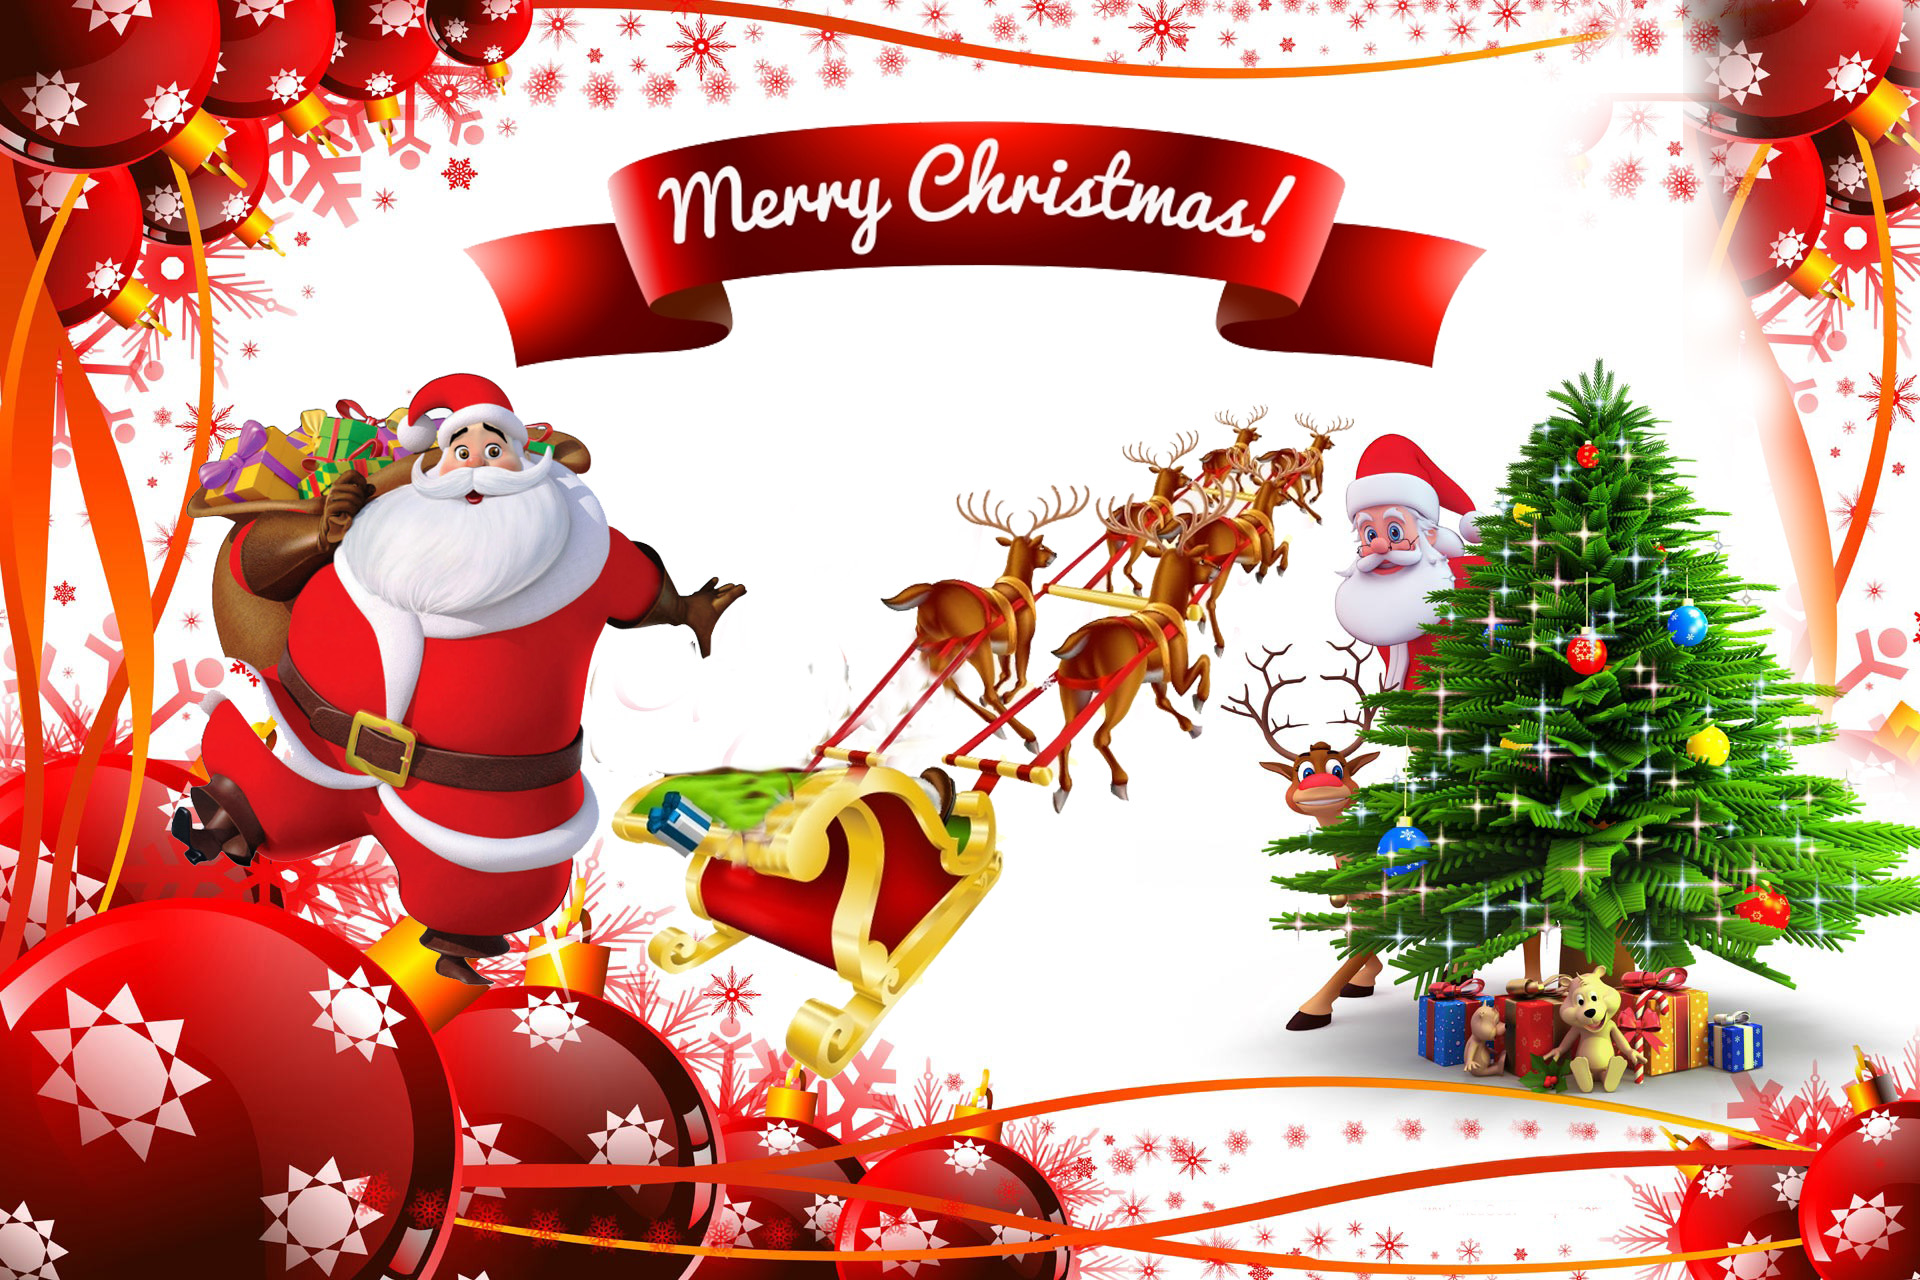 Christmas Images Wishes